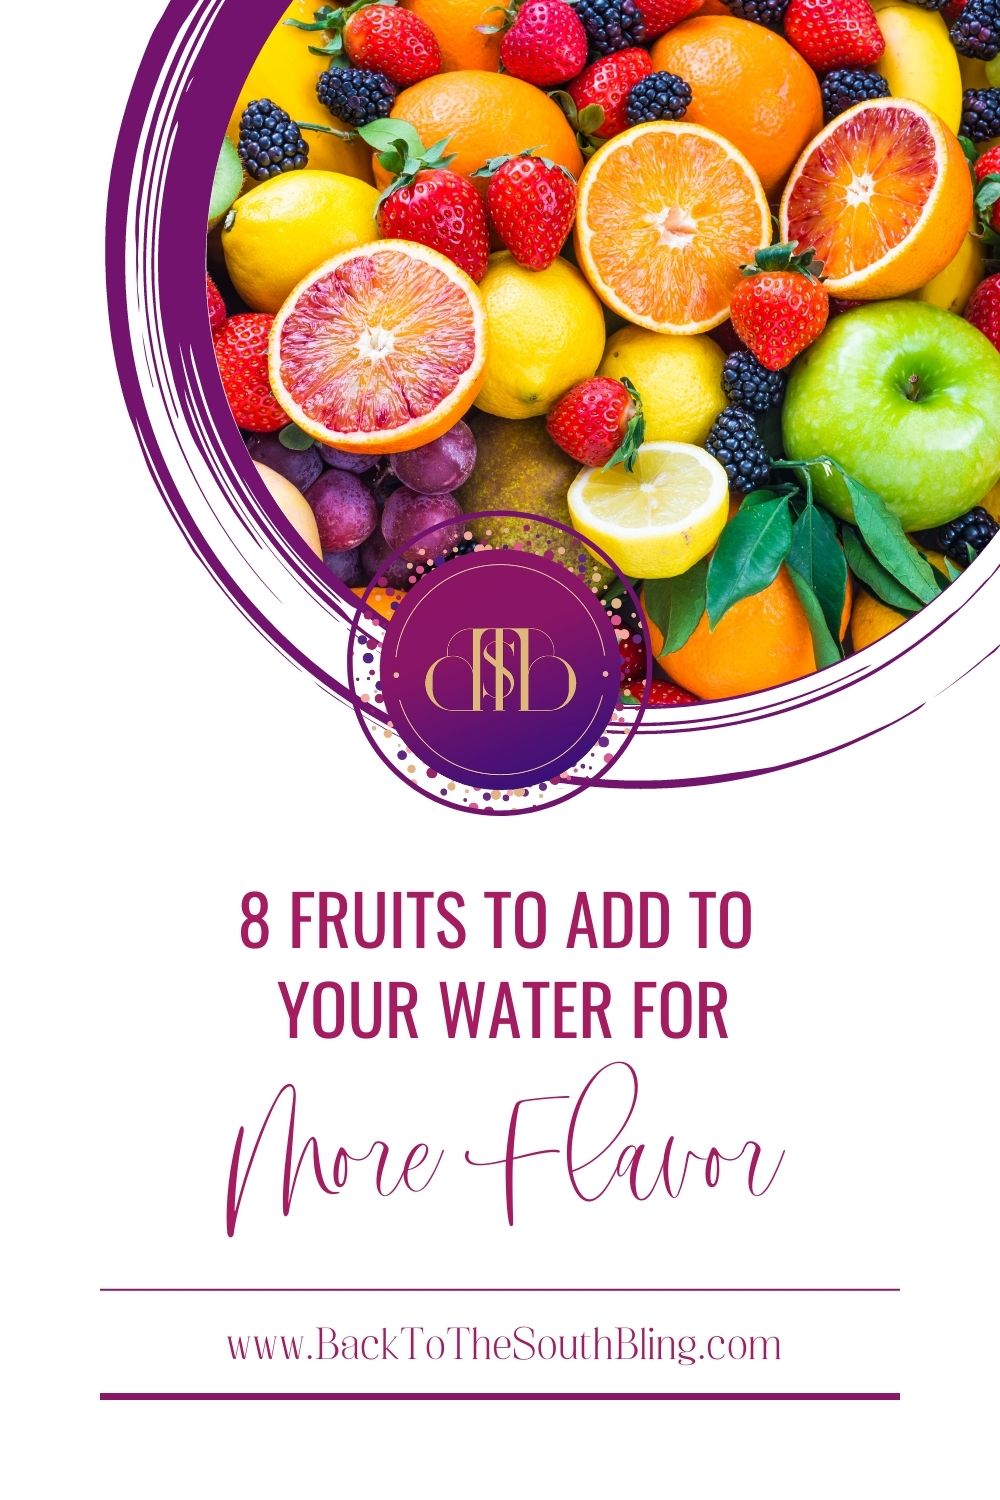 My Favorite Fruits to Add to Water | Back to the South Bling